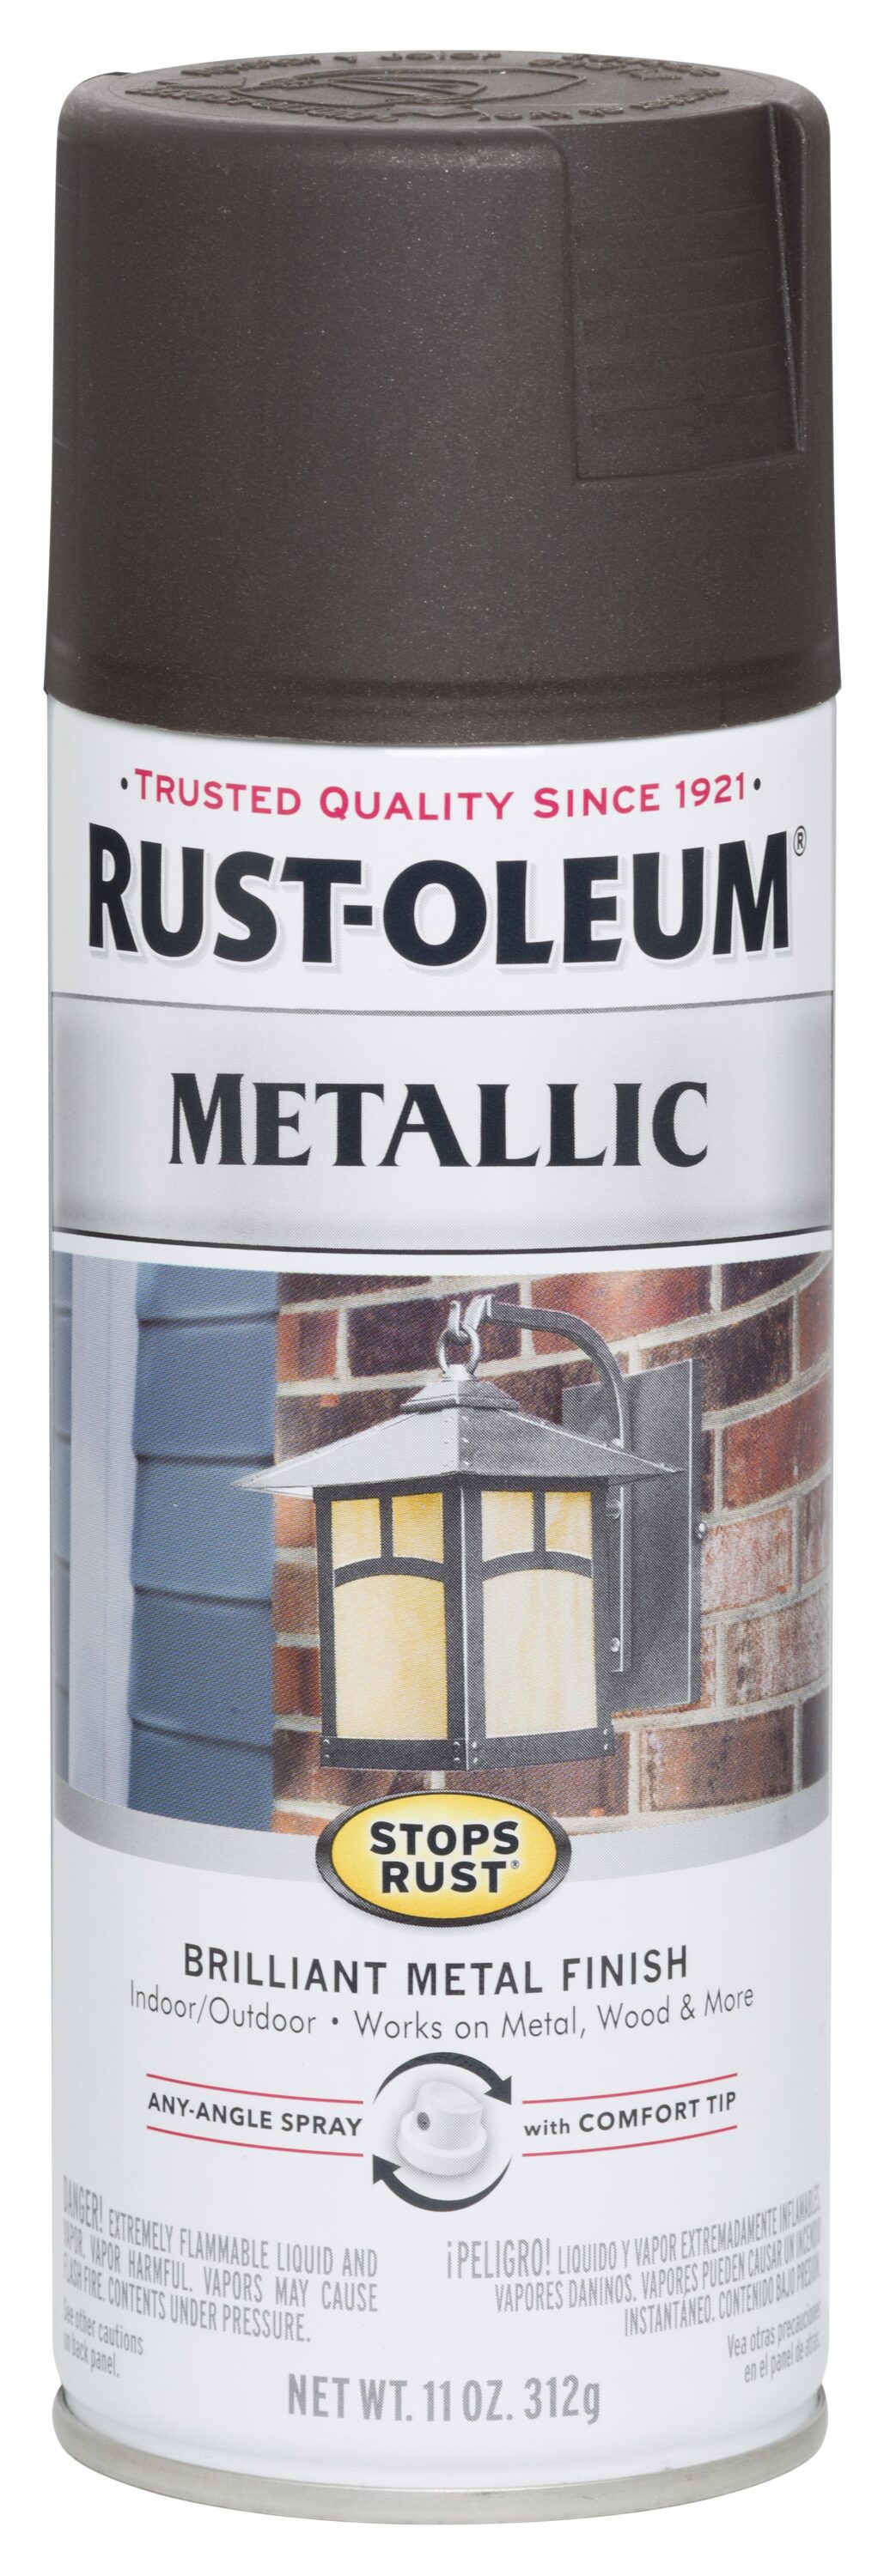 Metallic Rose Gold Paint By Fusion - Available At Blue Star Antiques